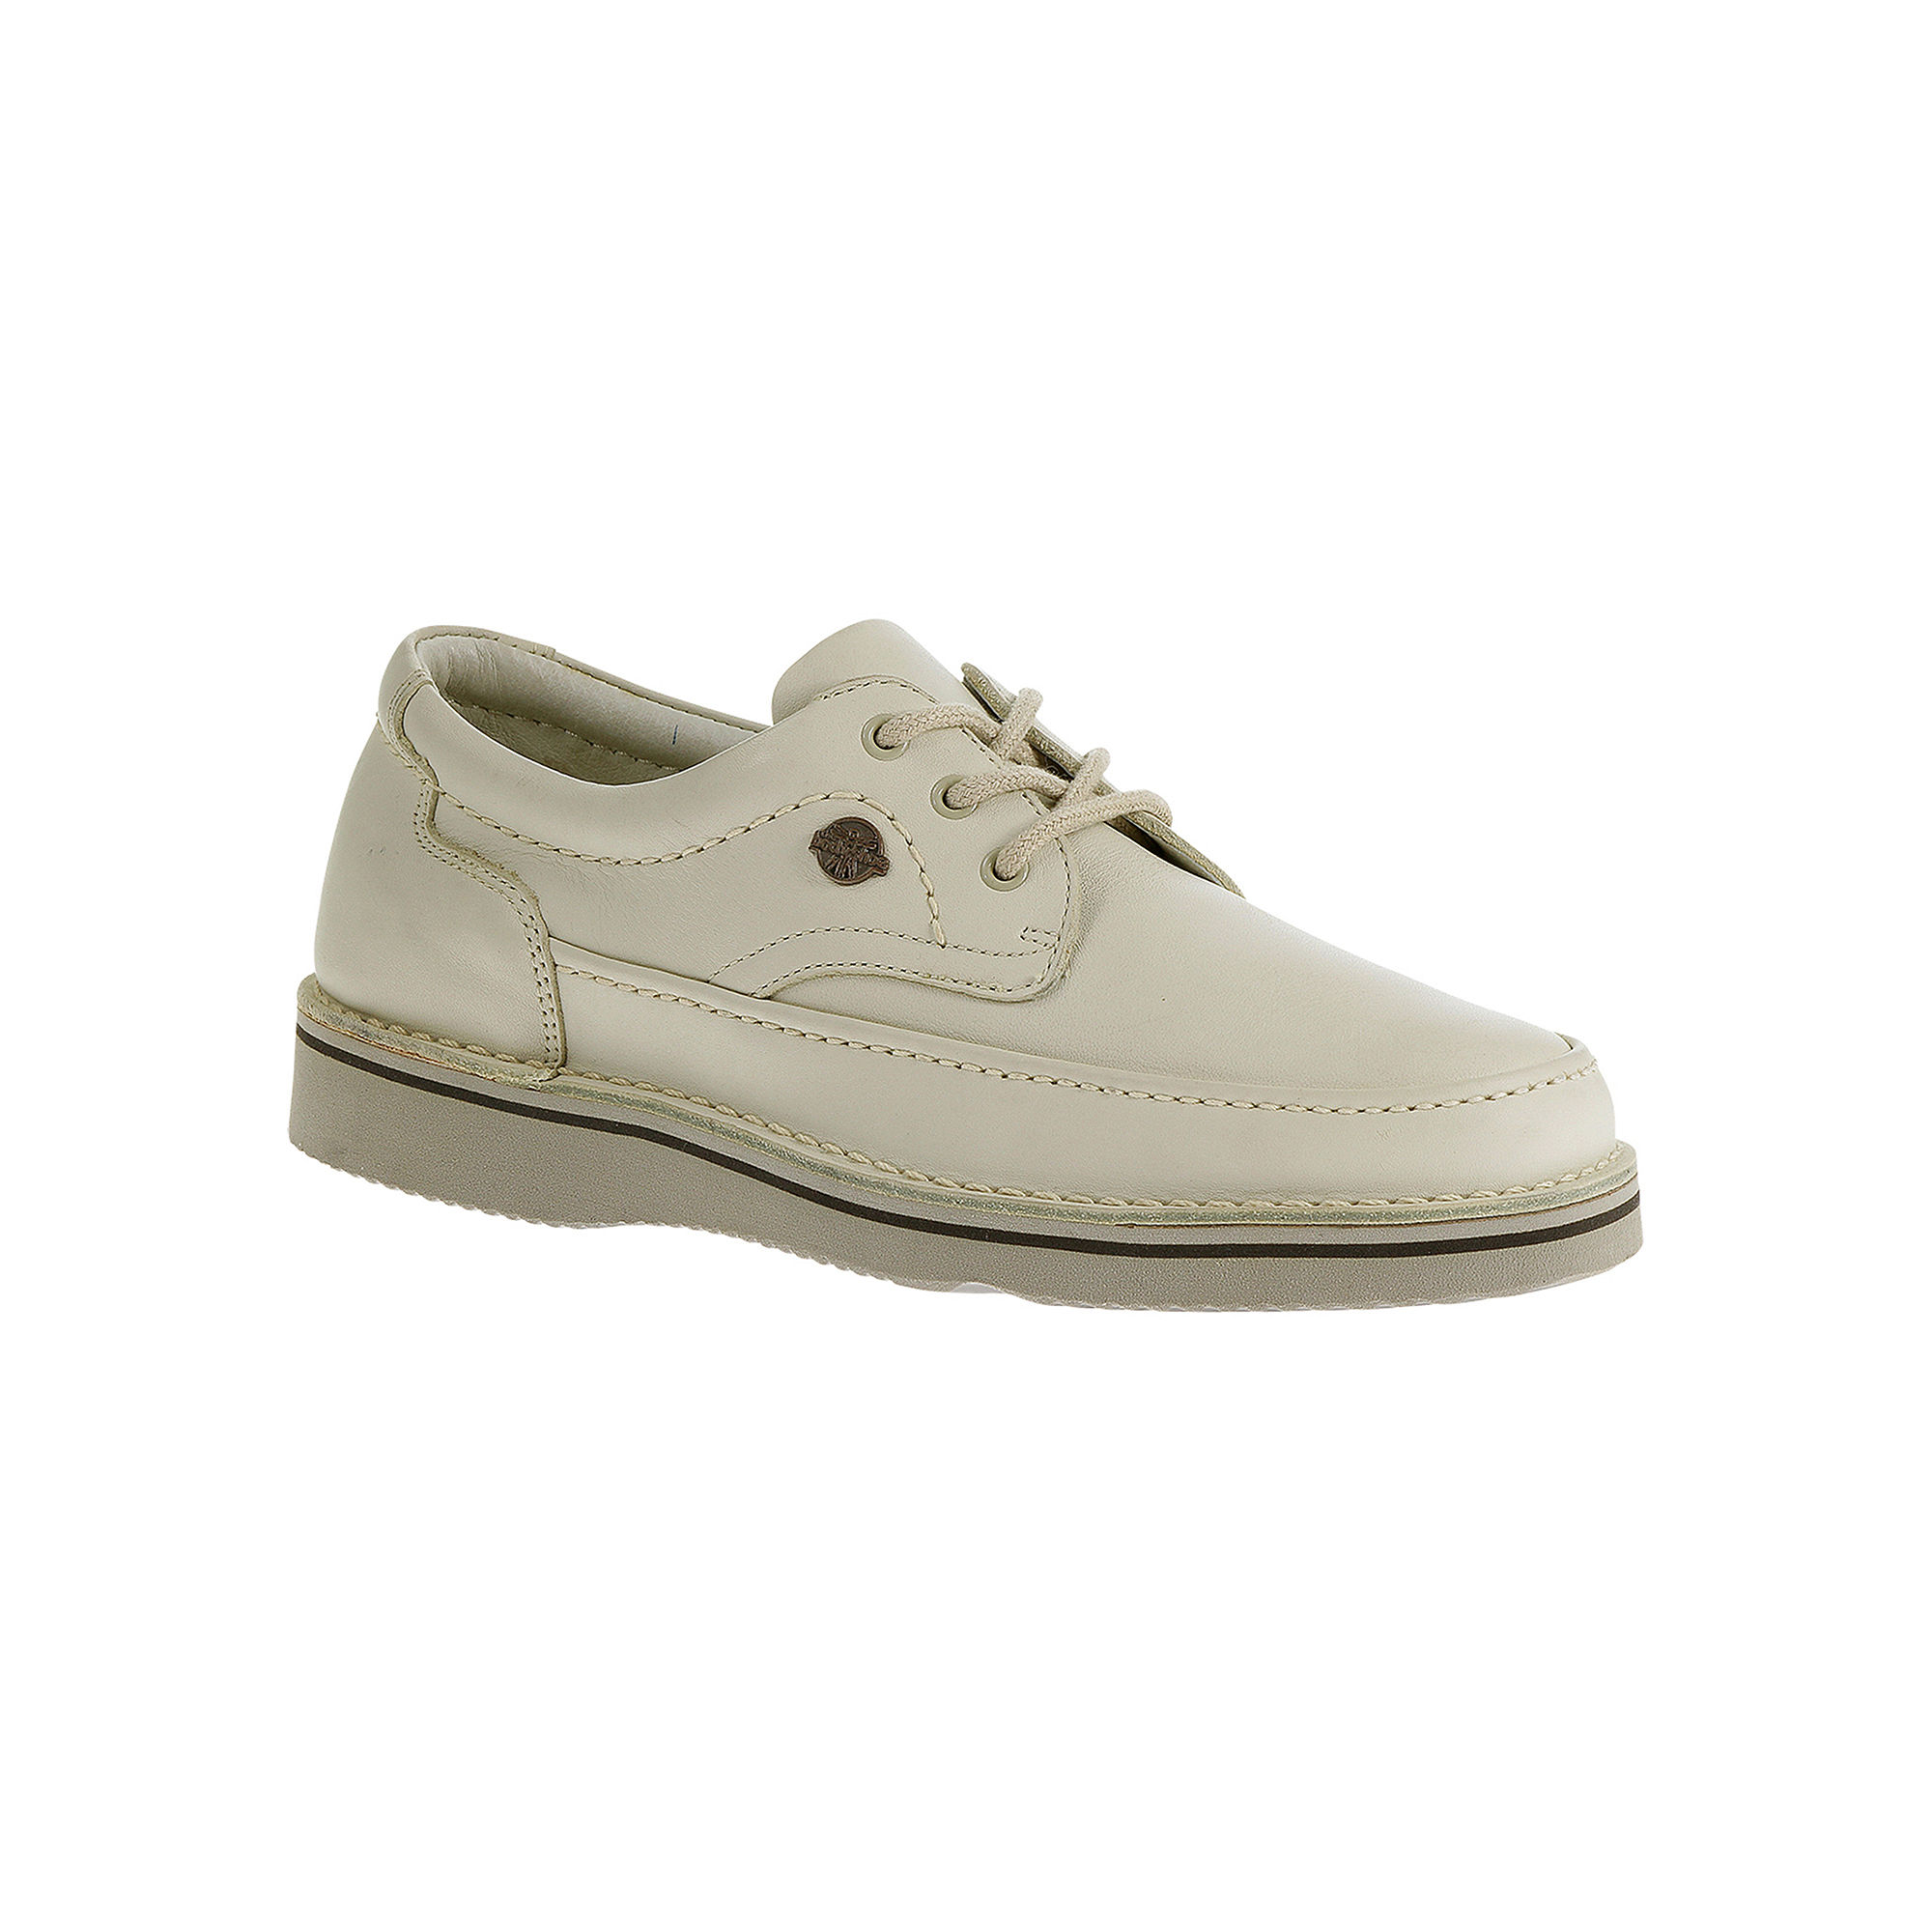 UPC 018461896865 product image for Hush Puppies Mall Walkers Comfort Shoes | upcitemdb.com